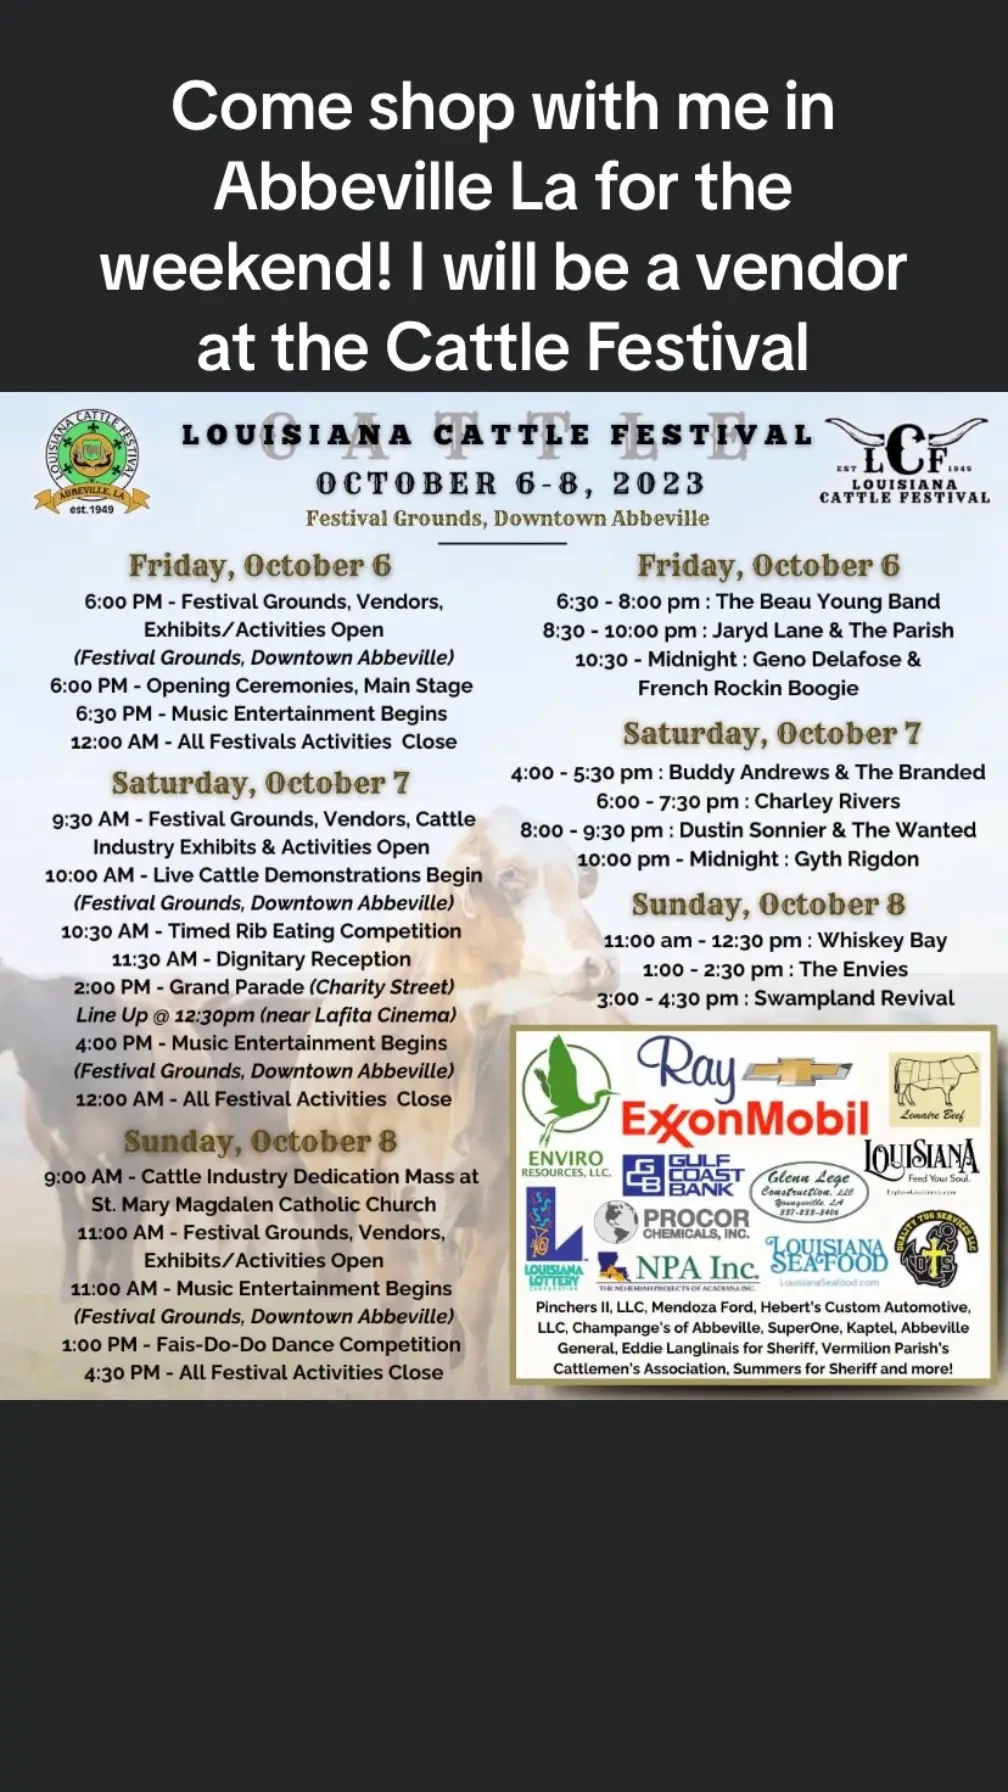 Come out and see me if you are in the Abbeville la area. #shop #chillfactory2021.com #cattlefestival 